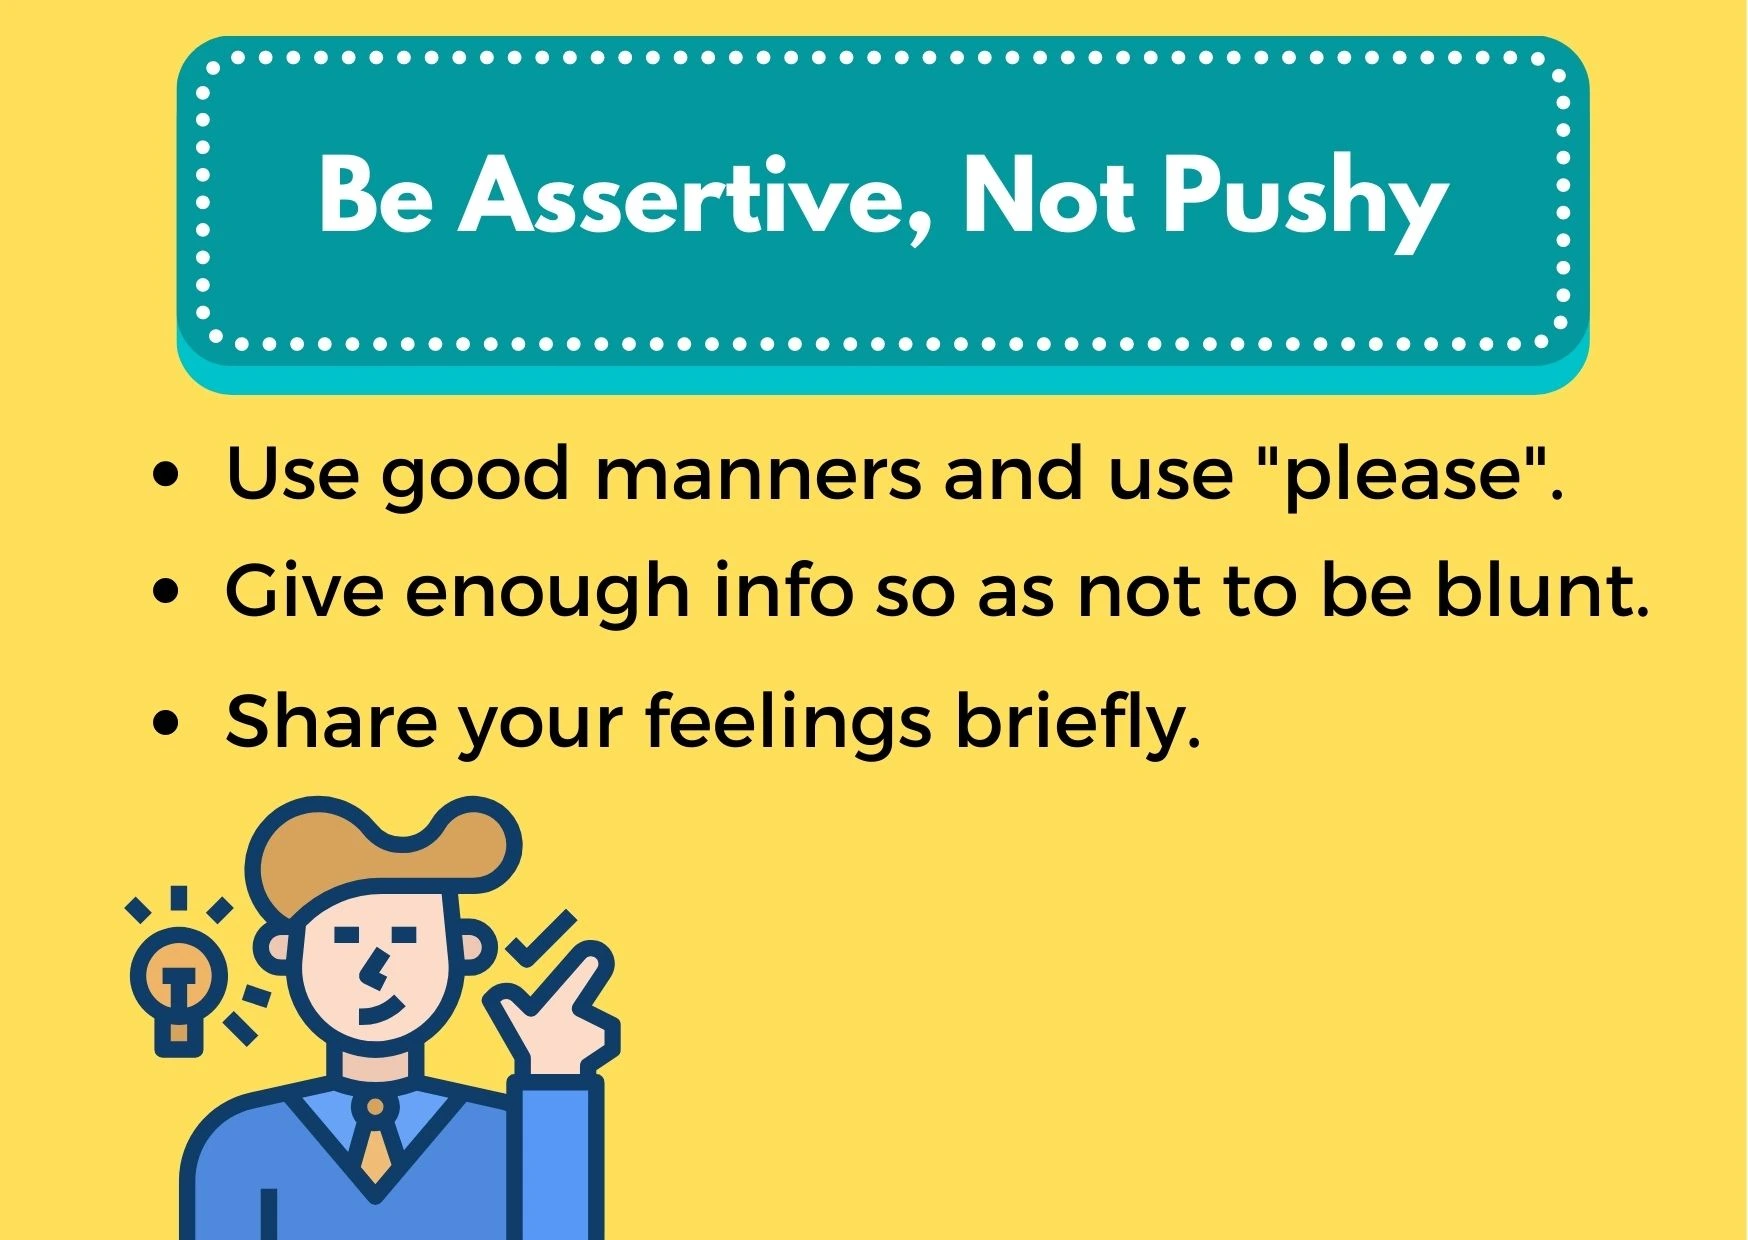 Graphic advising on how to be assertive, but not pushy: (1) use good manners, for example say "please" (2) Give enough info so as not to be blunt (3) Share your feelings briefly